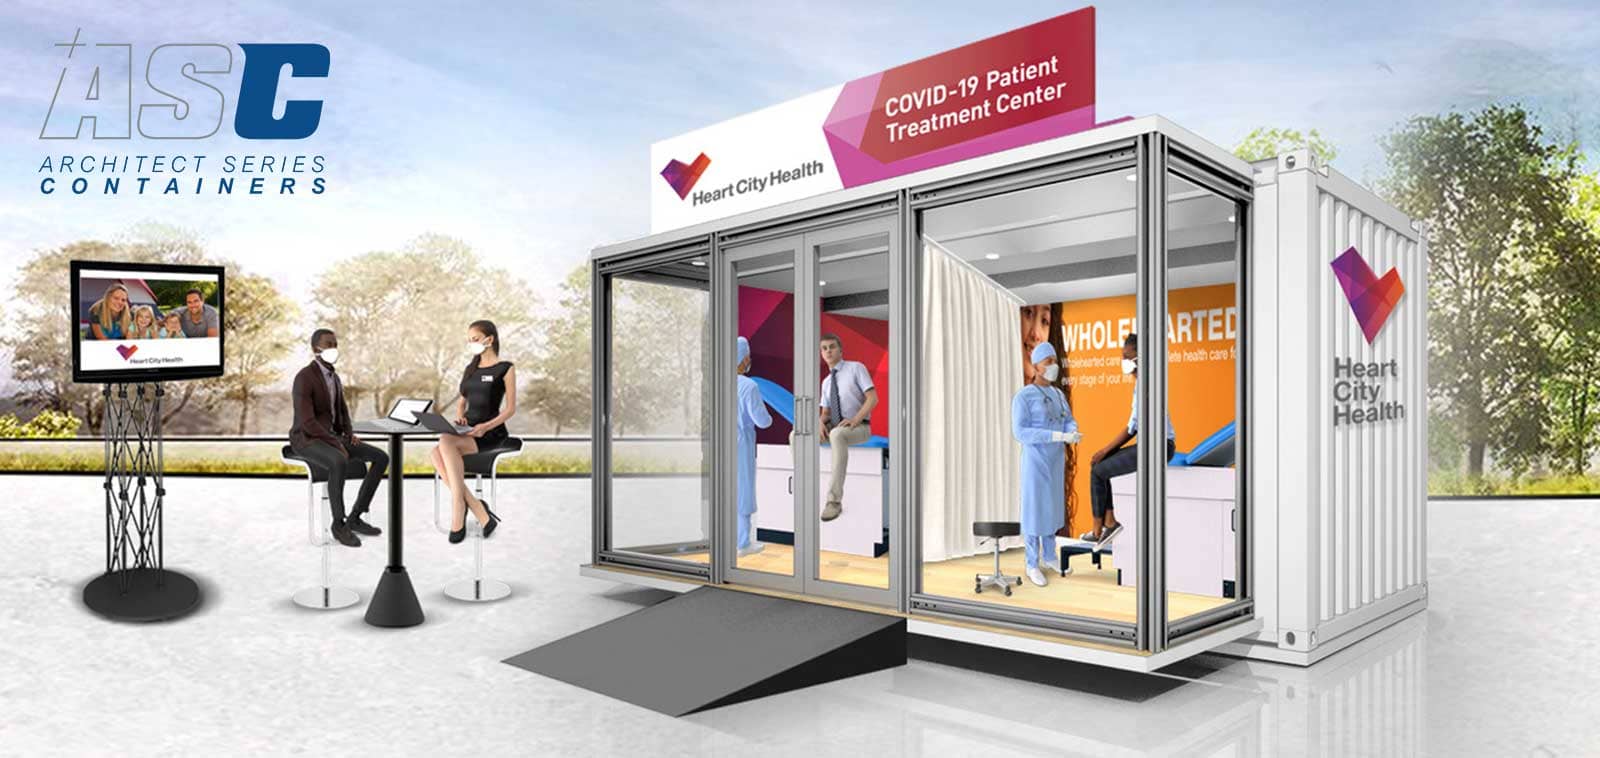 Mobile Healthcare Architect Series Containers